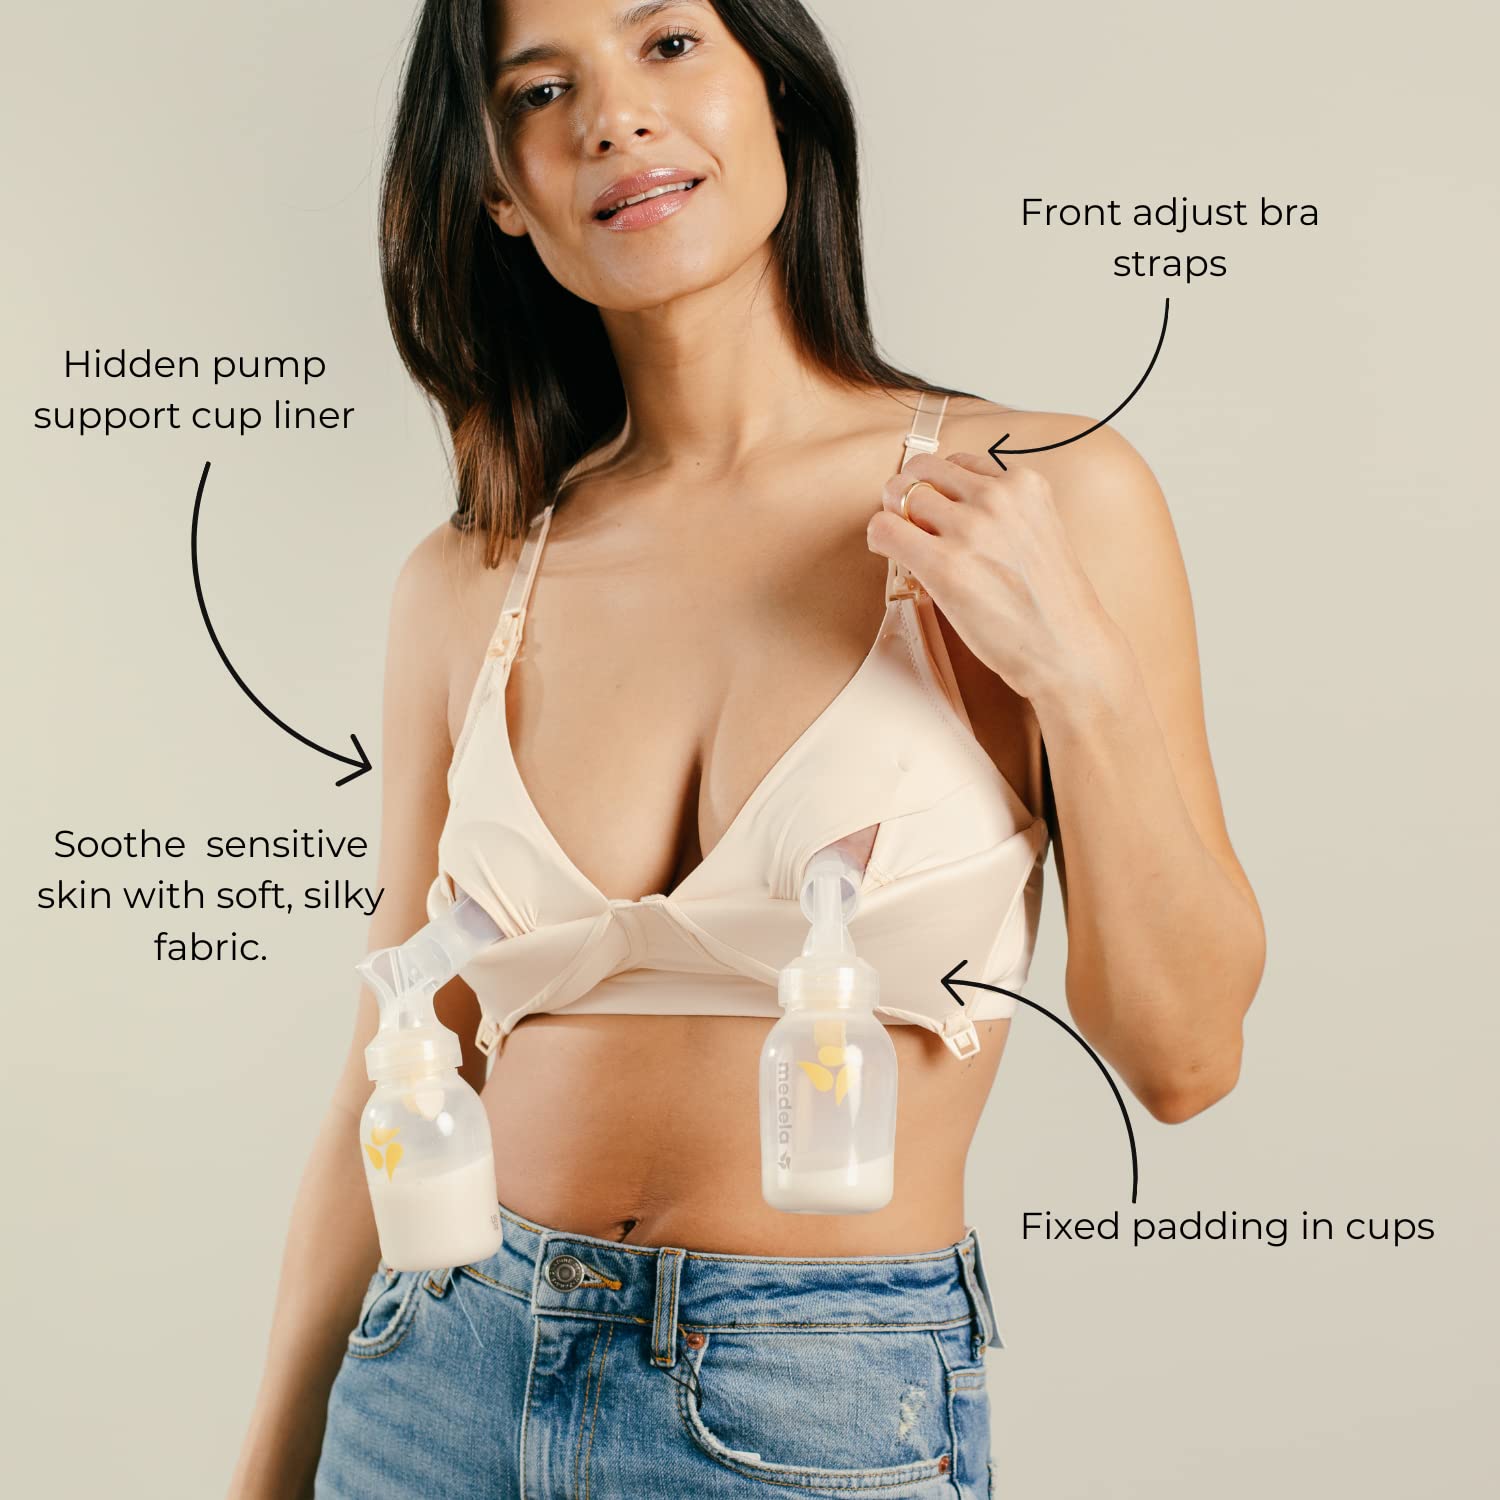 Simple Wishes Pumping and Nursing Bra in One with Fixed Padding - Patented Supermom T-Shirt - Pumping Bra Hands Free